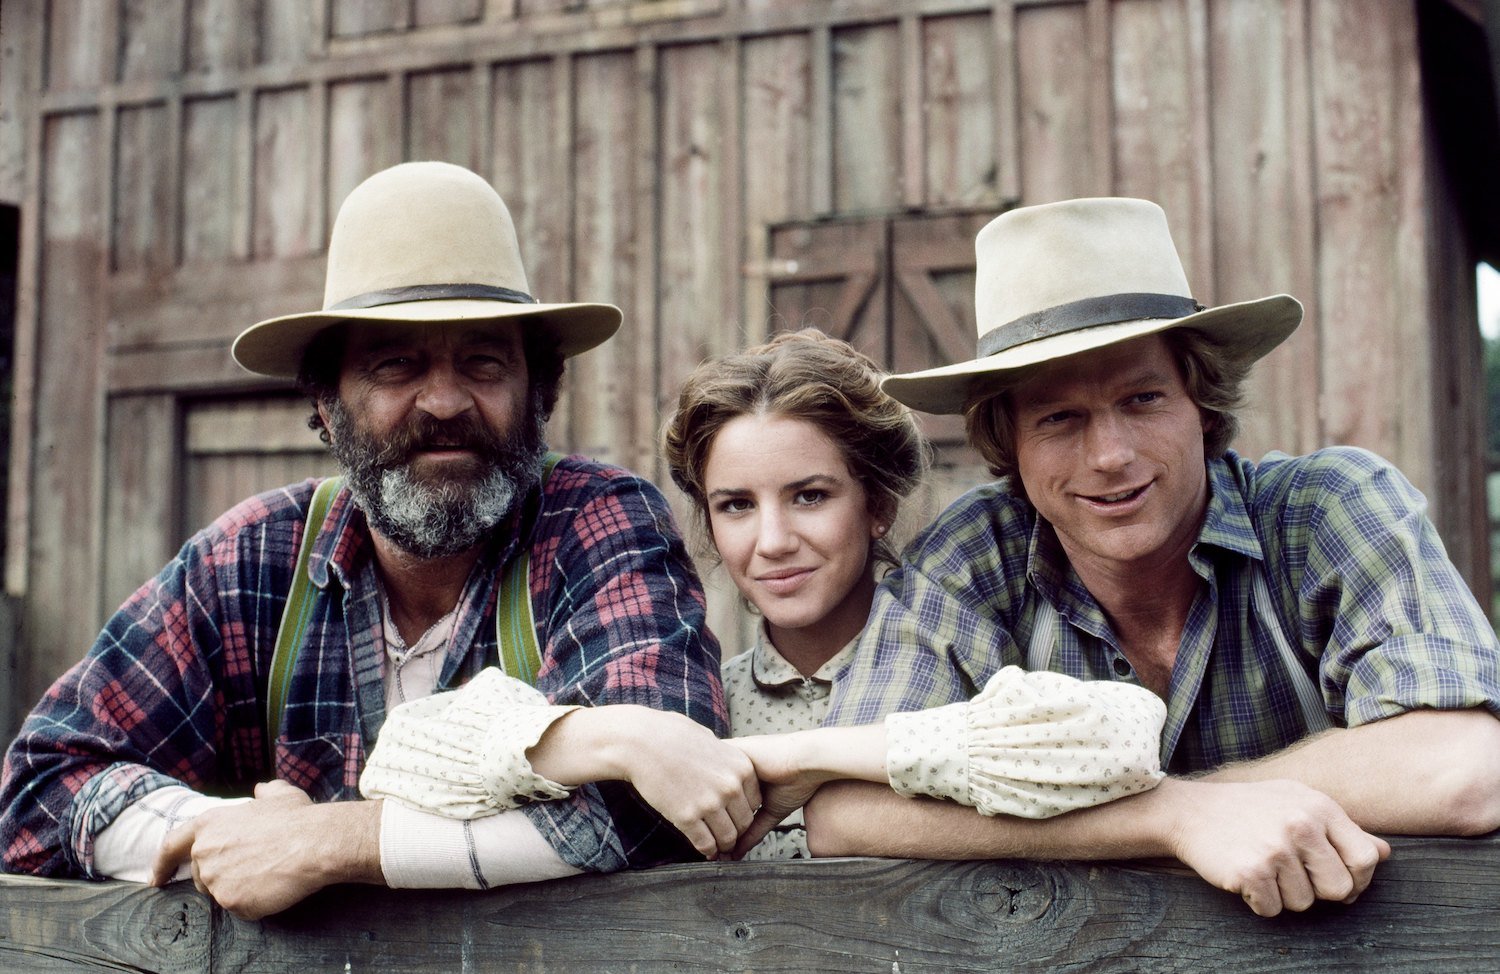 Victor French as Isaiah Edwards, Melissa Gilbert as Laura Elizabeth Ingalls Wilder, and Dean Butler as Almanzo James Wilder on 'Little House on the Prairie'